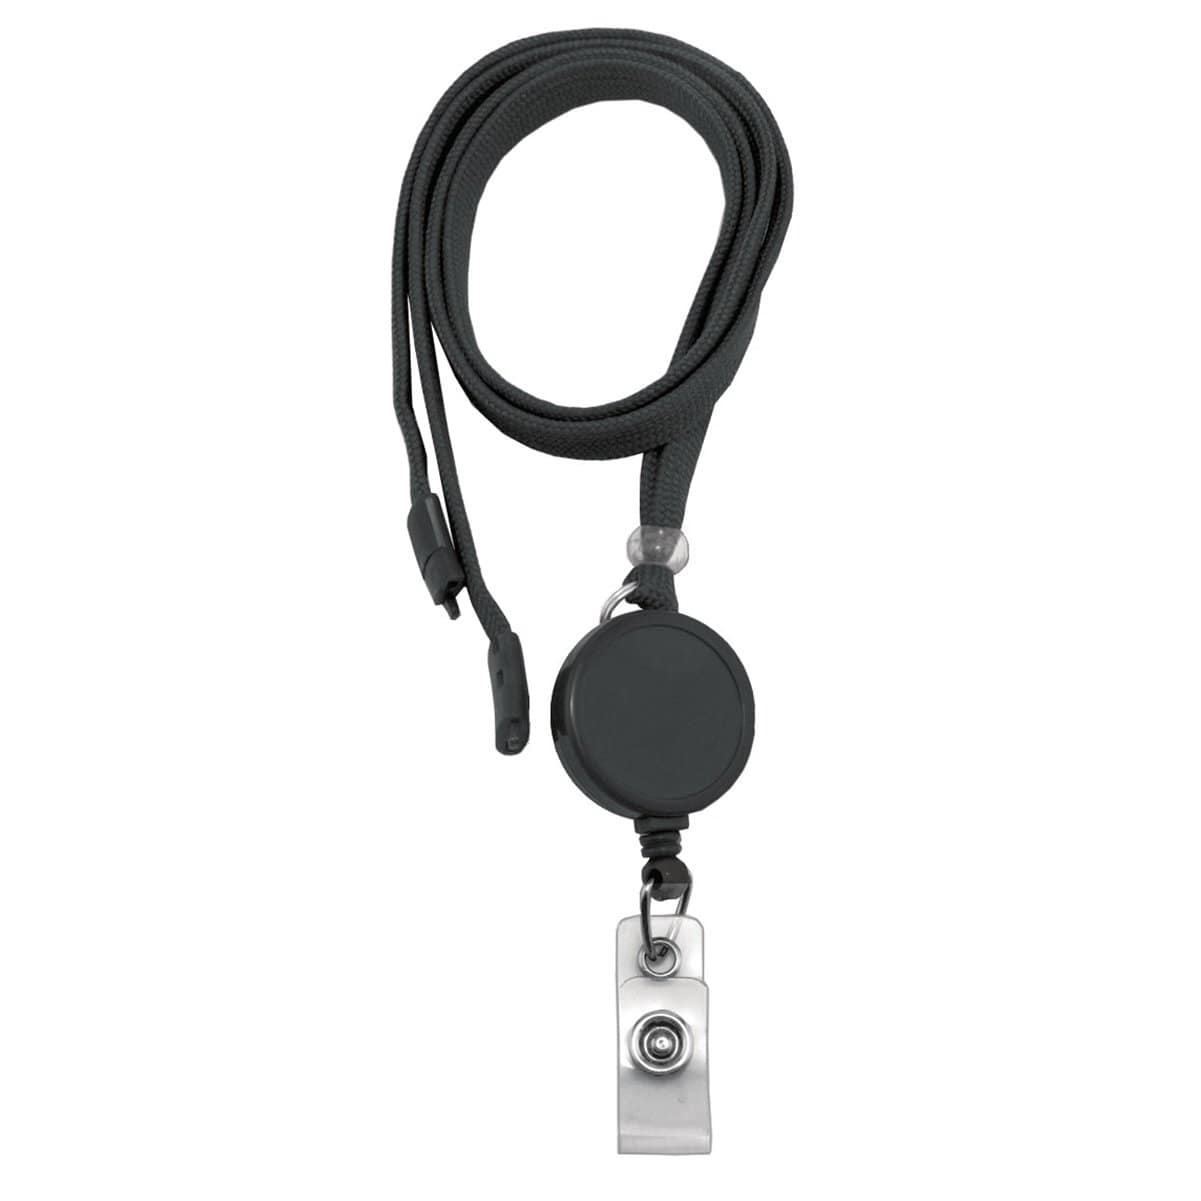 Image of a black Breakaway Lanyard ID Holder Badge Reel Combo - Retractable Lanyard (SPID-210X) with a metal clip attachment on the end, perfect for ID card display.